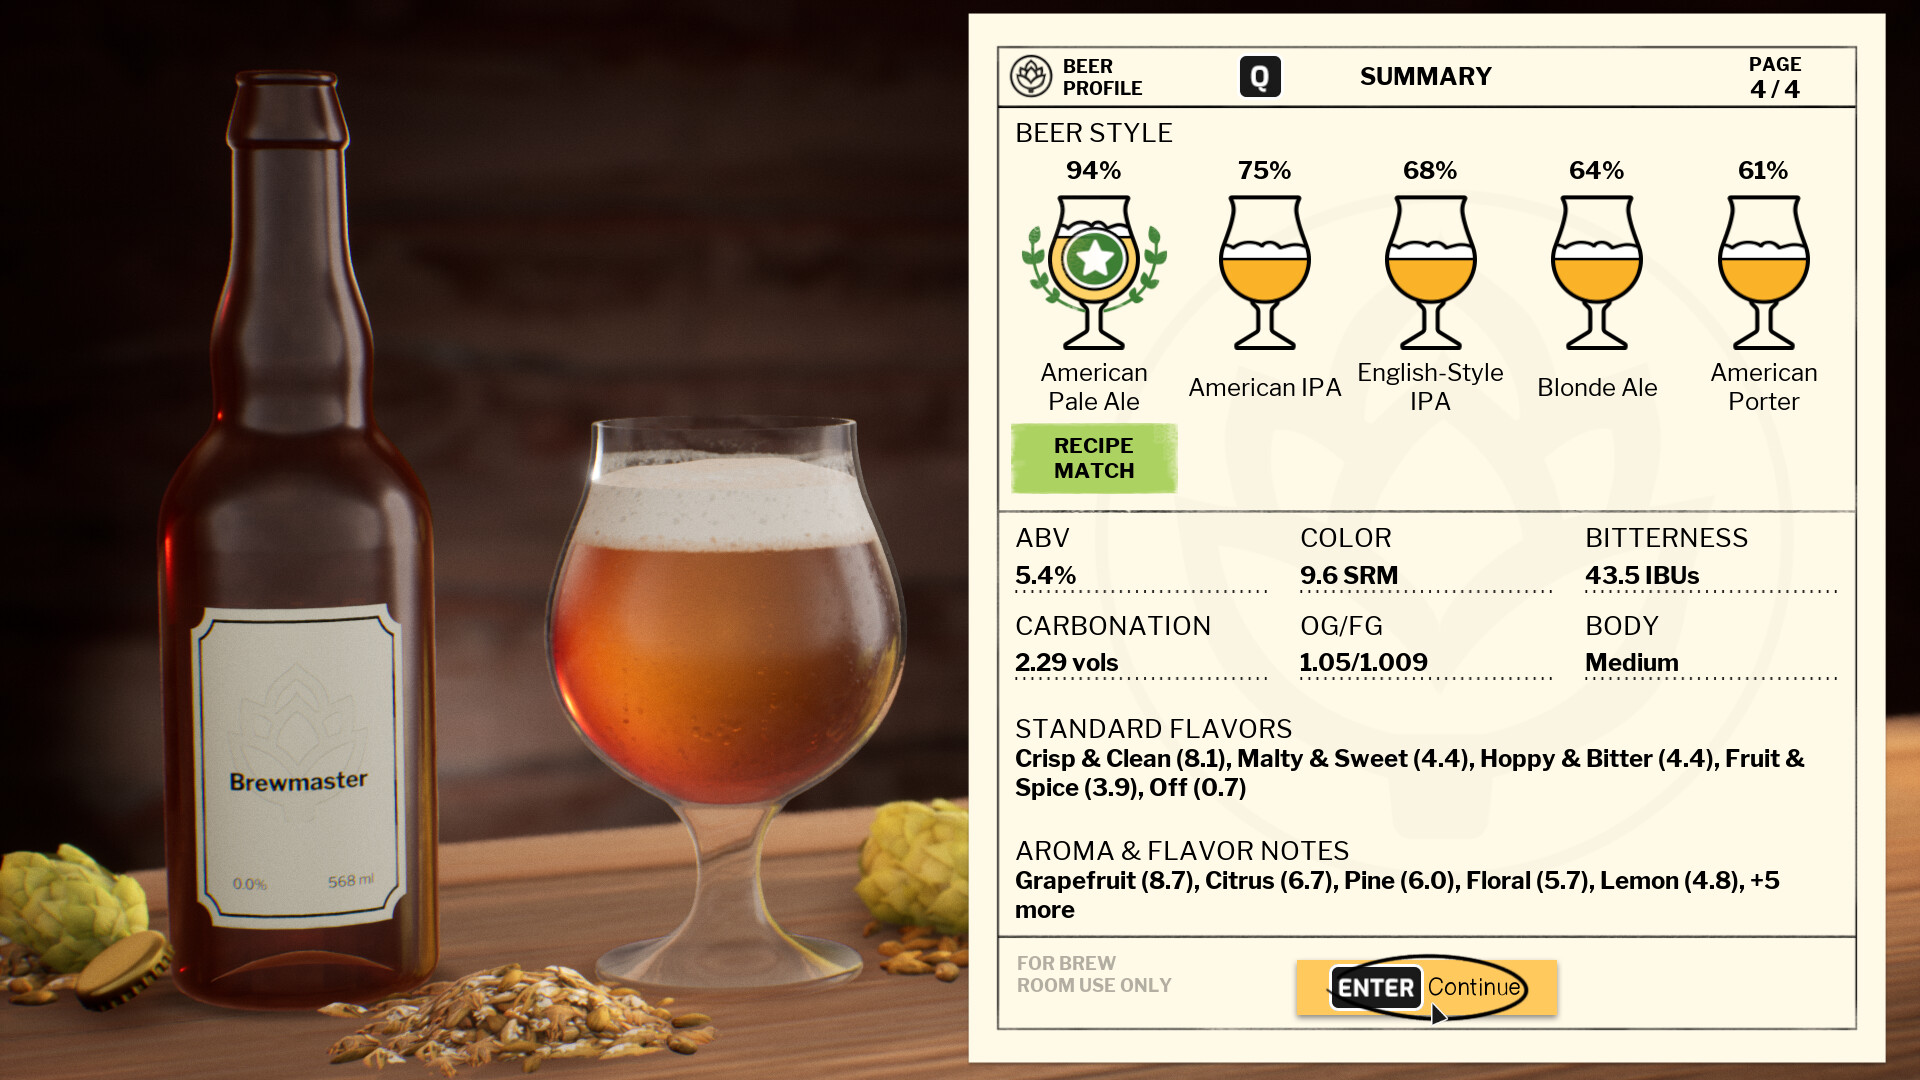 Brewmaster: Save Simulator on Steam Brewing 45% on Beer